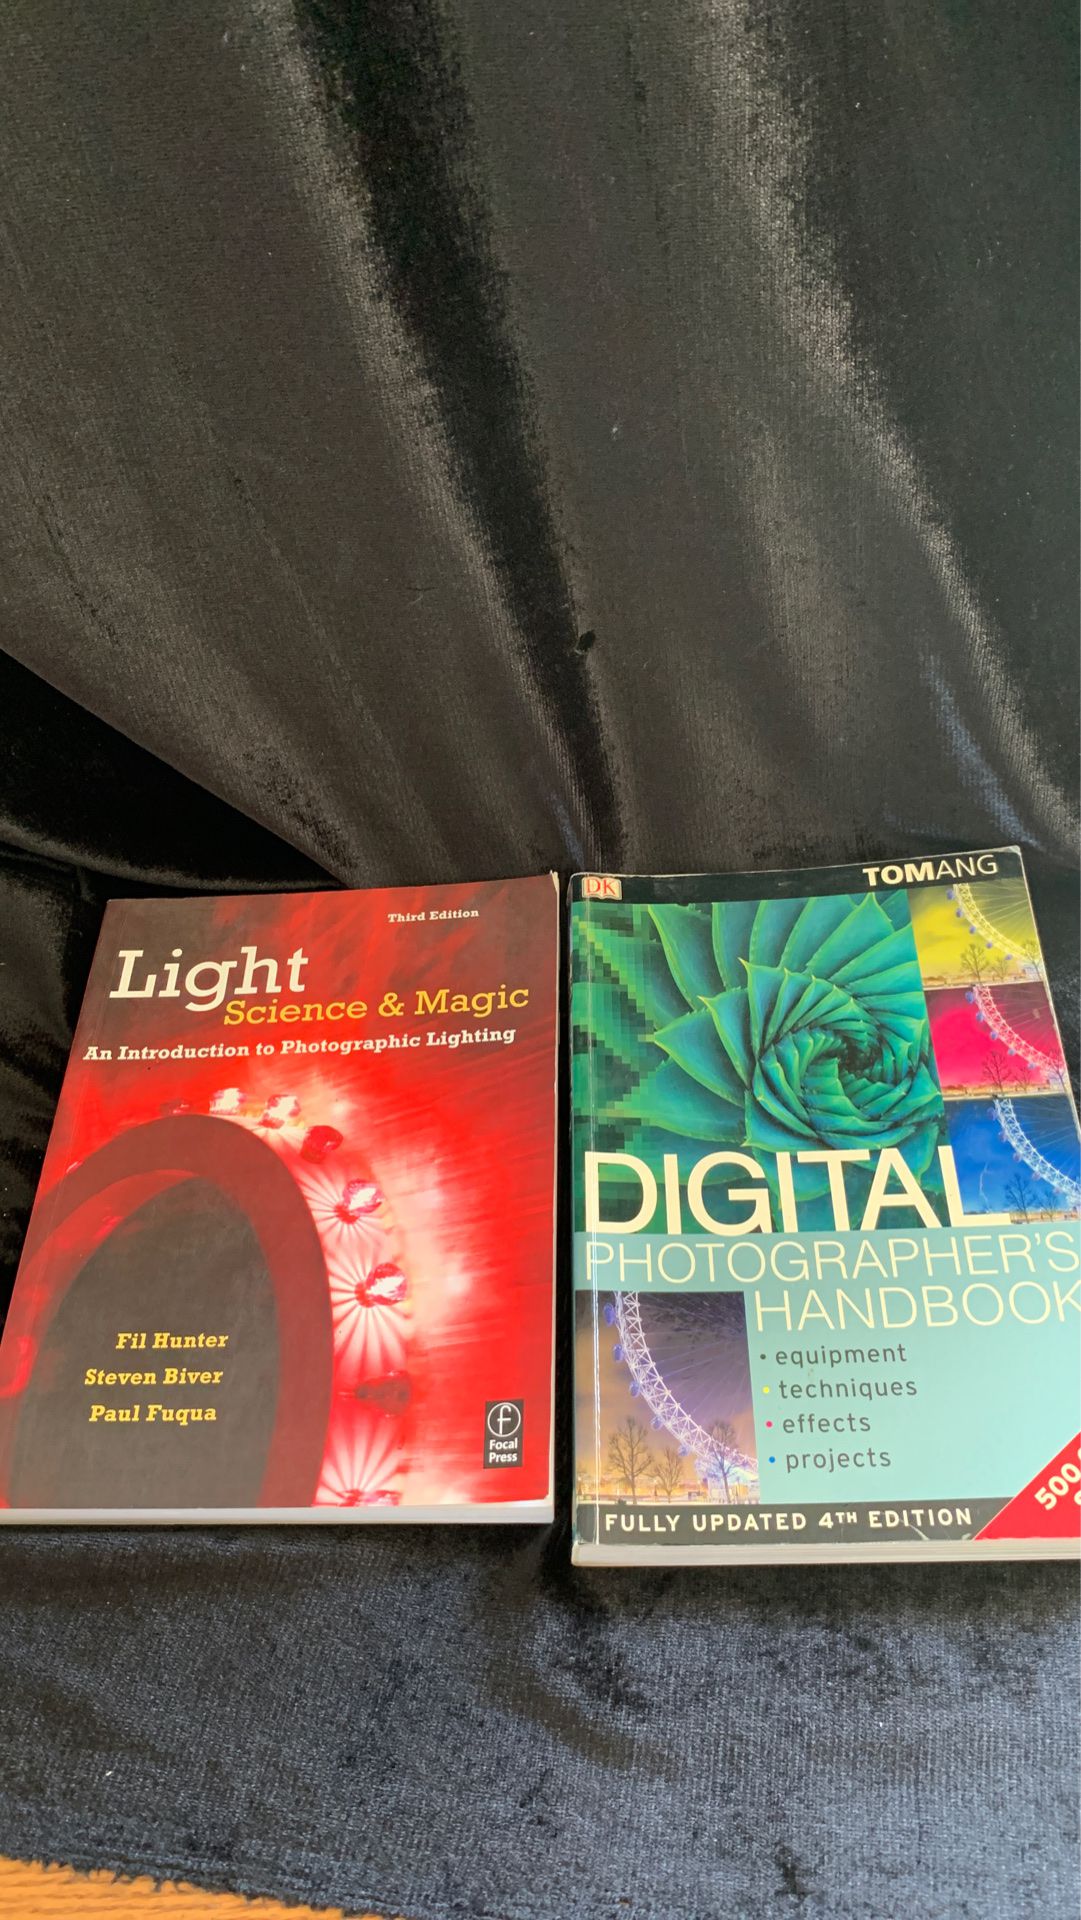 2 great books on digital photography and lightening(gg)